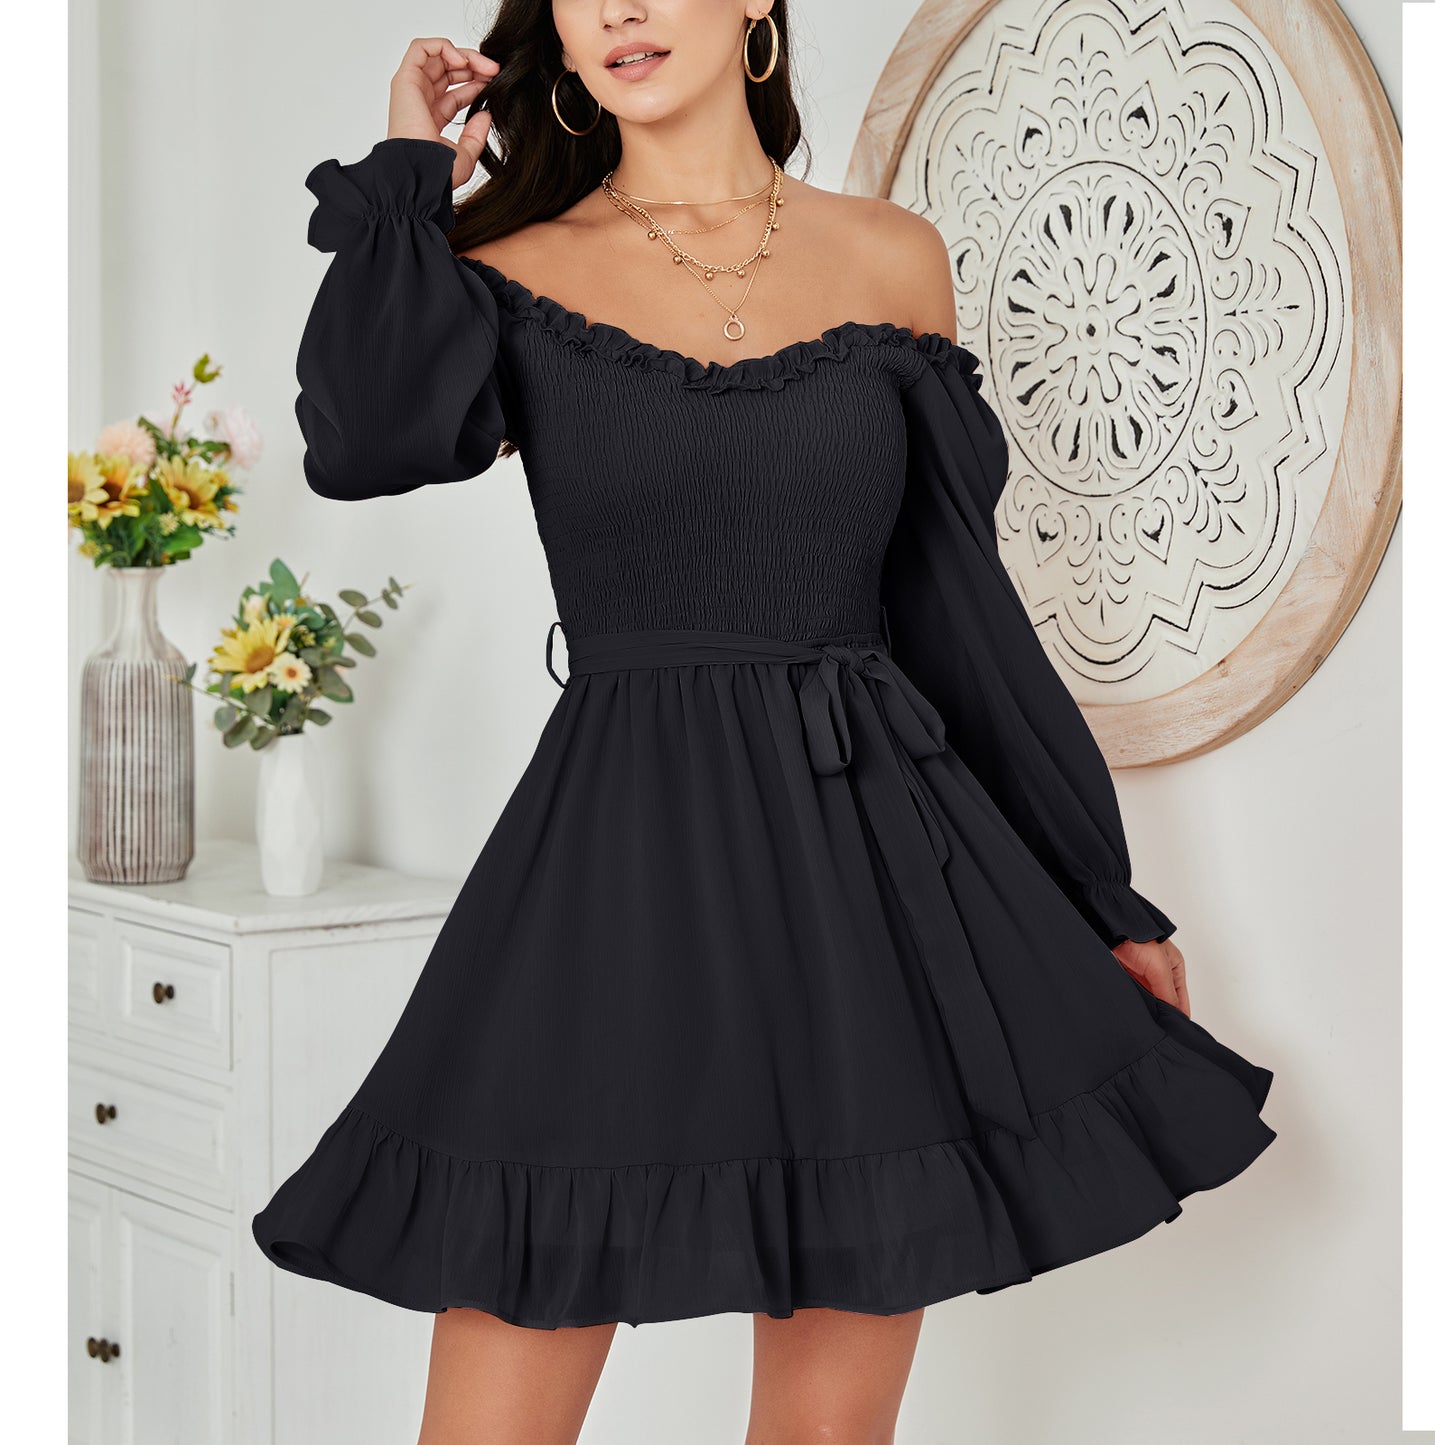  Vacation Dresses for Women - Flowy Smocked Puff Sleeve Summer  Dress, Wedding Guest Reversible Dress, Boho Convertible Casual Dress Black:  Clothing, Shoes & Jewelry